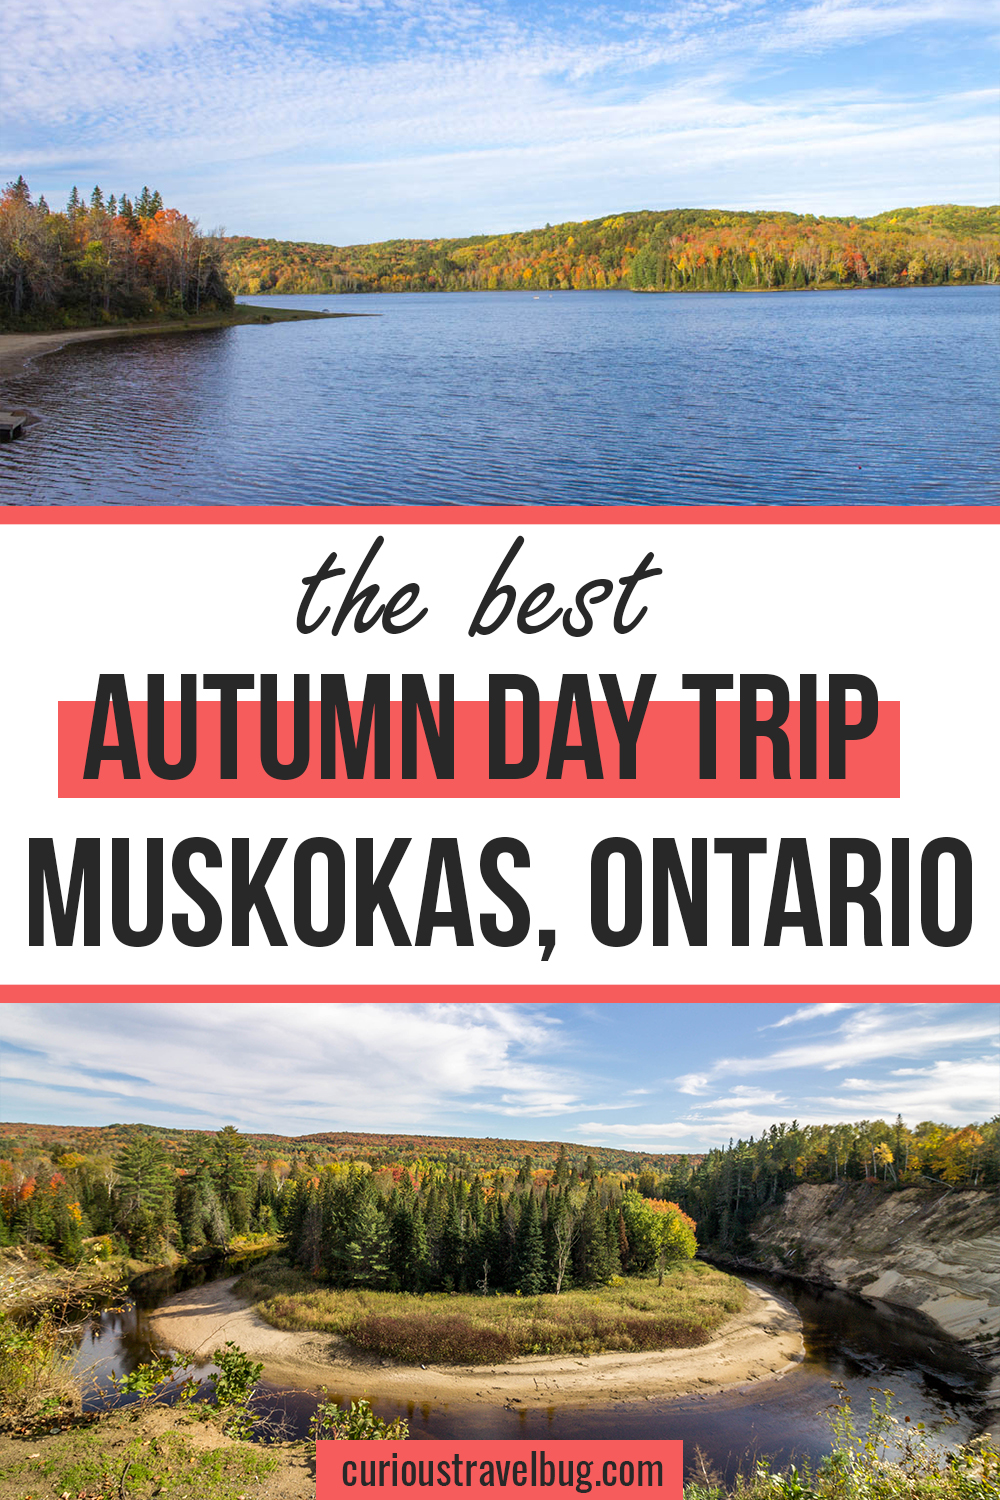 A day trip to the Muskokas to see the colours of Huntsville and Arrowhead Provincial Park is the perfect fall trip. With scenic drives, nice hikes, and great Ontario fall colours.